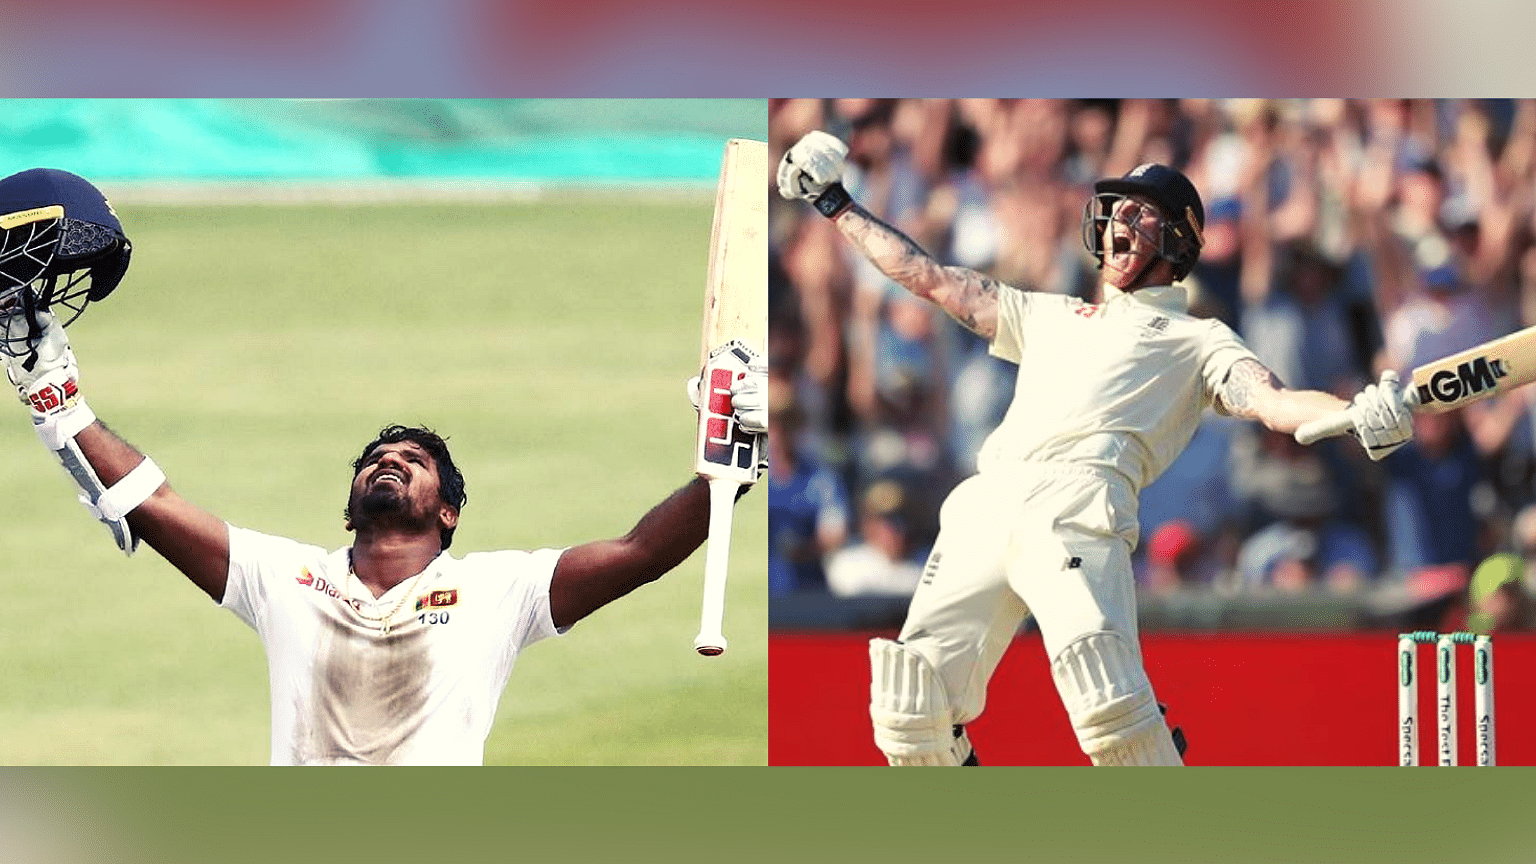 2019 has produced two of the greatest successful run chases in Test history – both achieved against impossible odds with only the last wicket in hand!